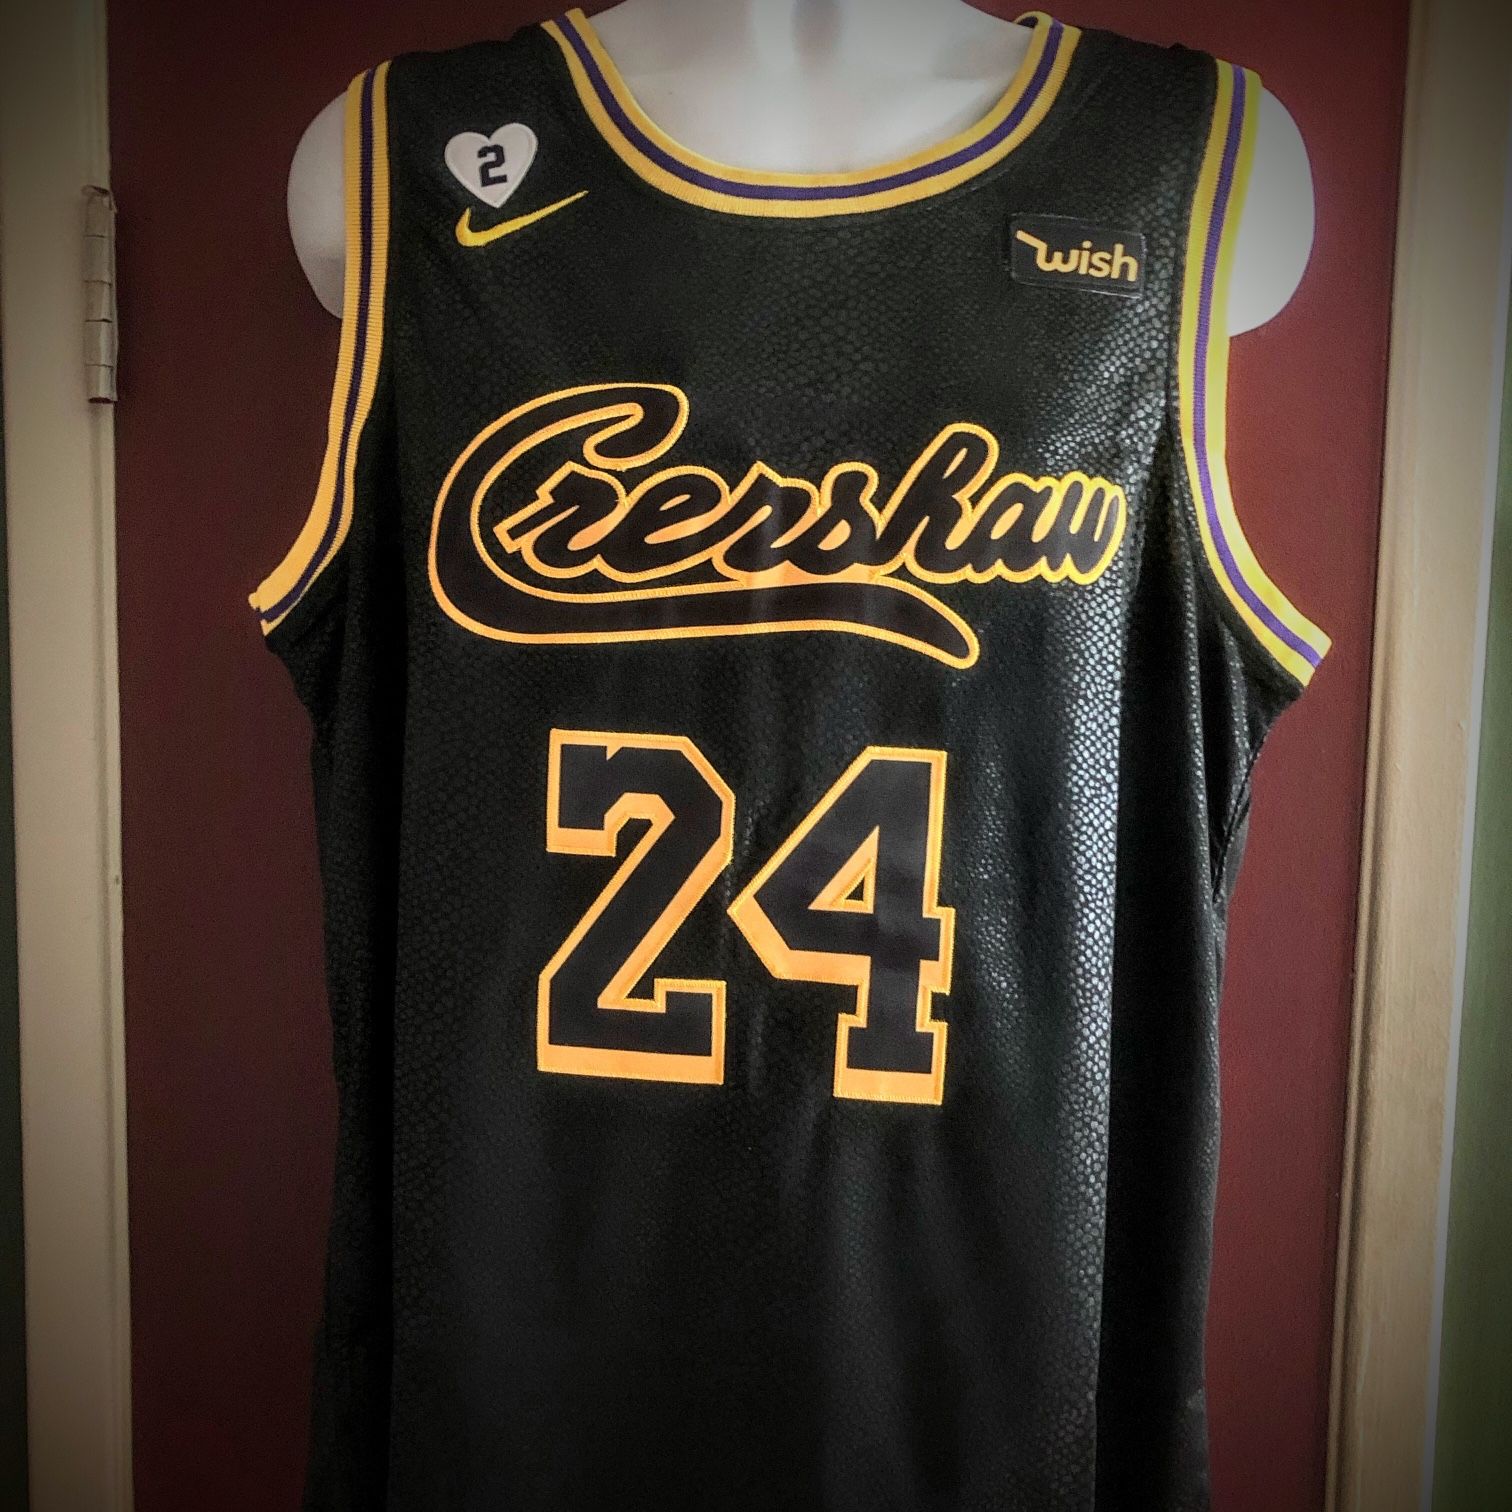 Los Angeles Lakers #24 Kobe Bryant Retro NBA Basketball Jersey -S.M.2X for  Sale in Carson, CA - OfferUp